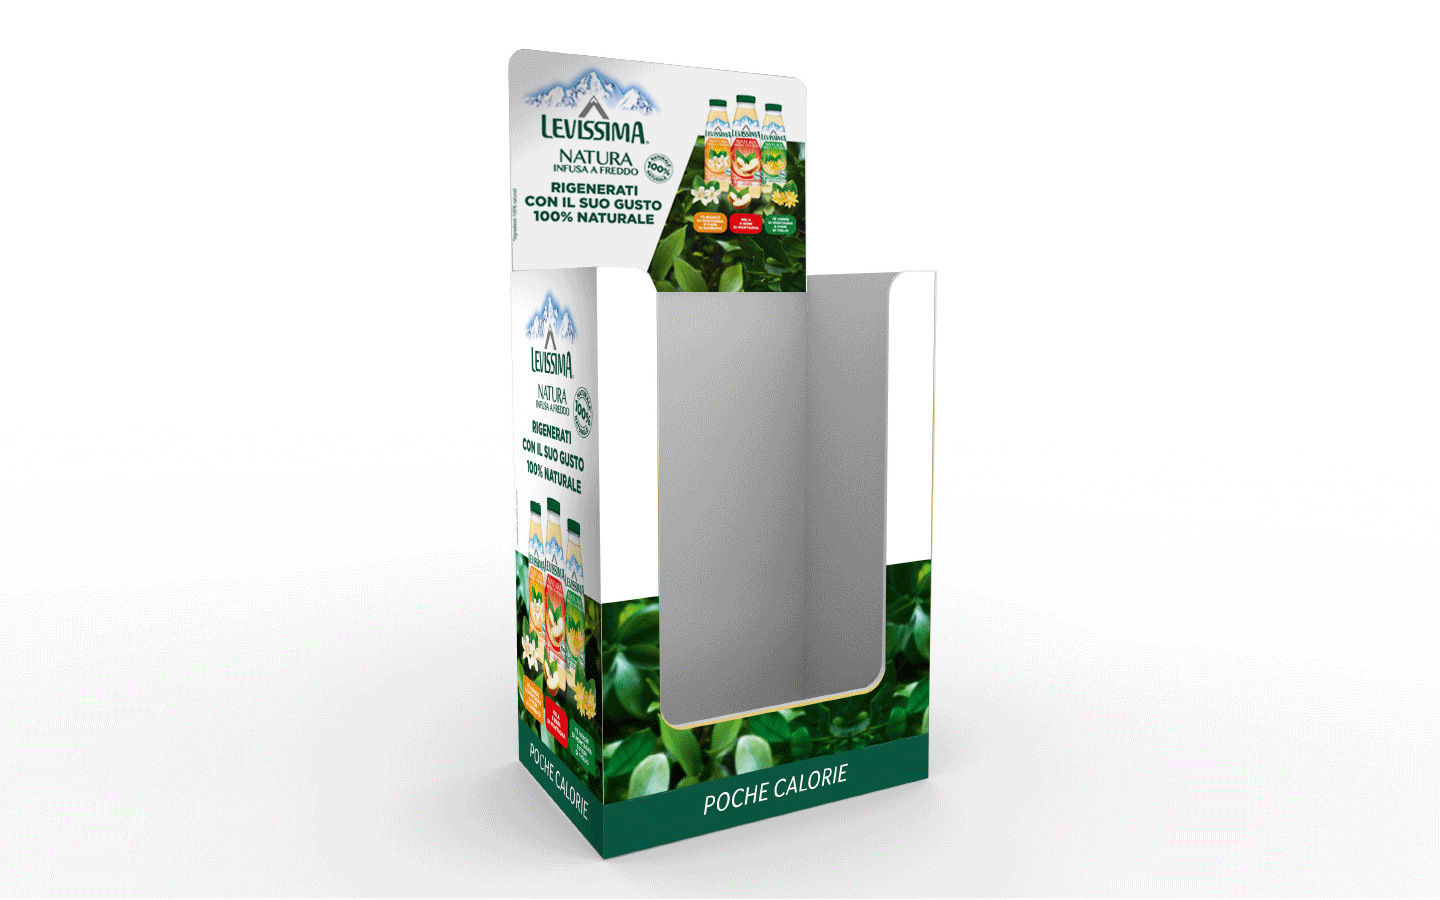 Btl communication materials for Levissima Natura and Levissima+ designed by ATC for the grocery channel